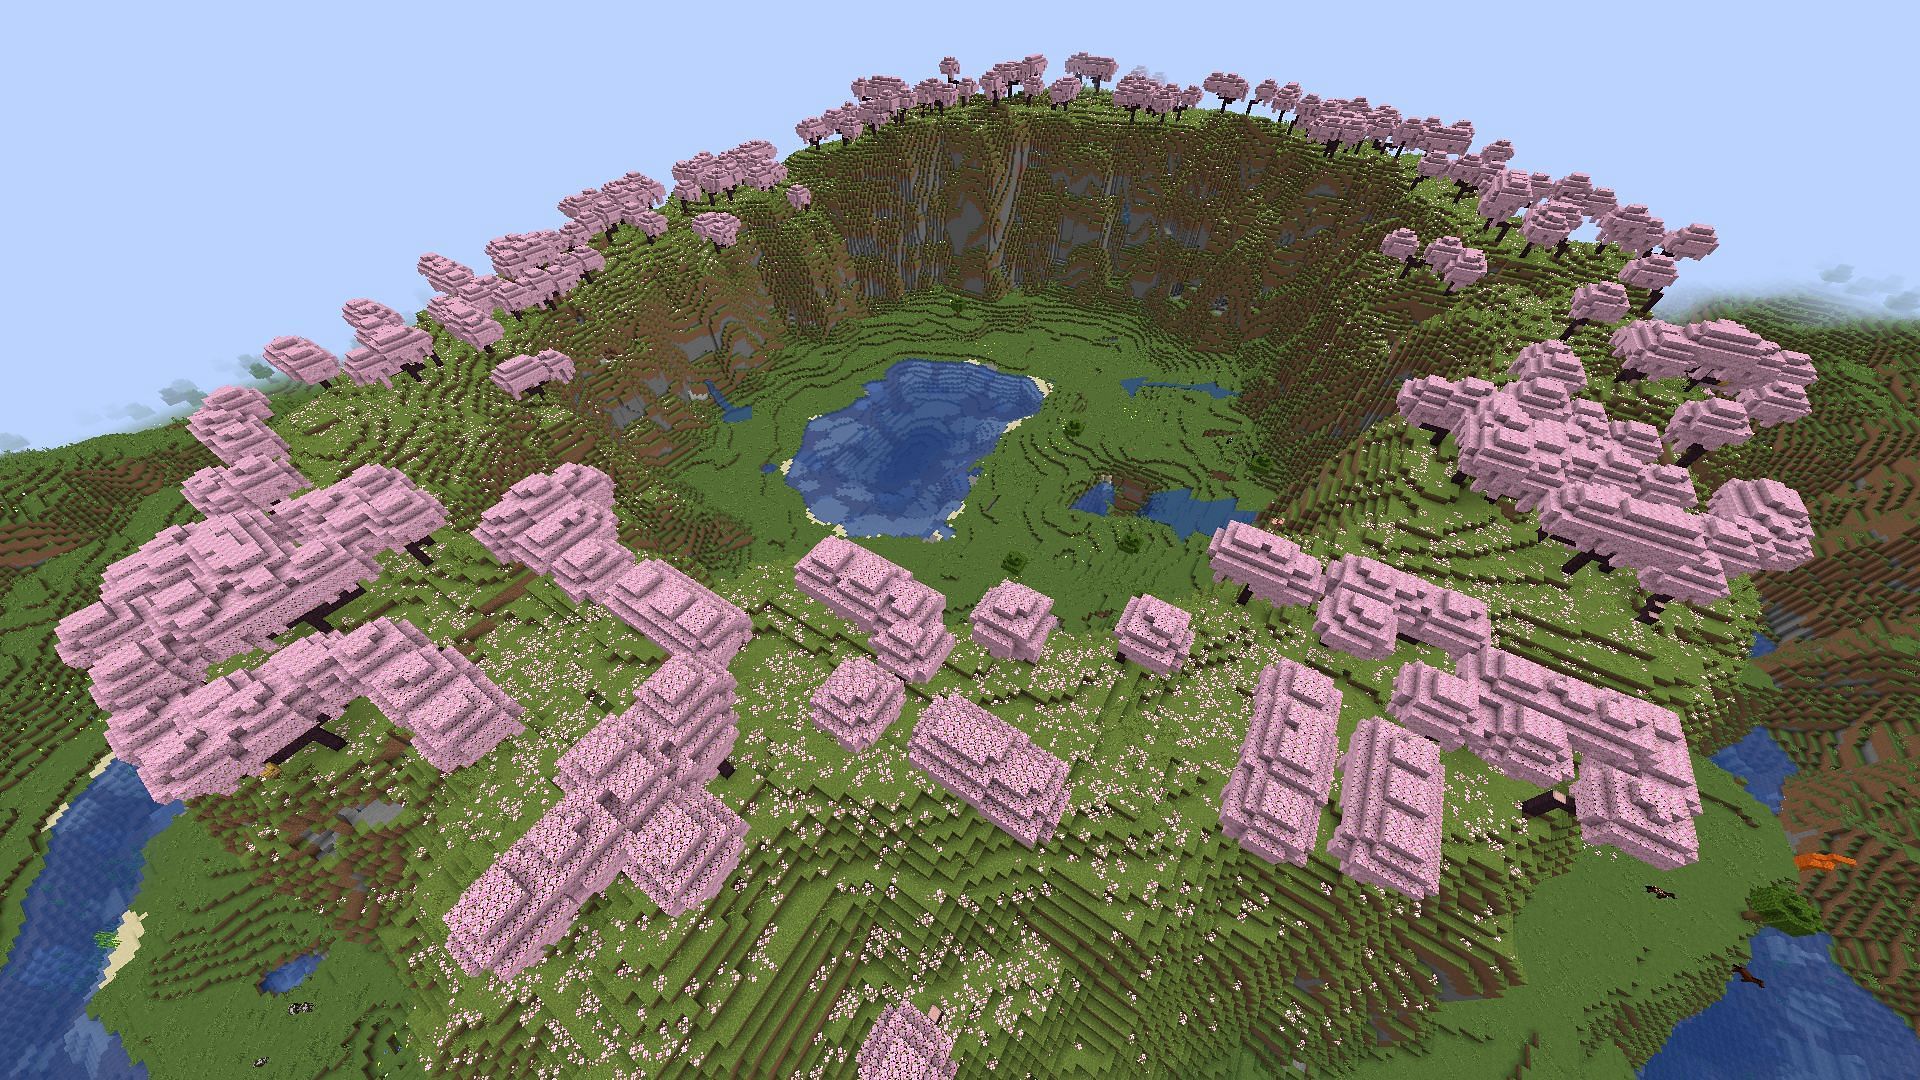 Cherry Grove biome completely surrounds a plains area with a lake in Minecraft 1.20.1 (Image via Mojang)